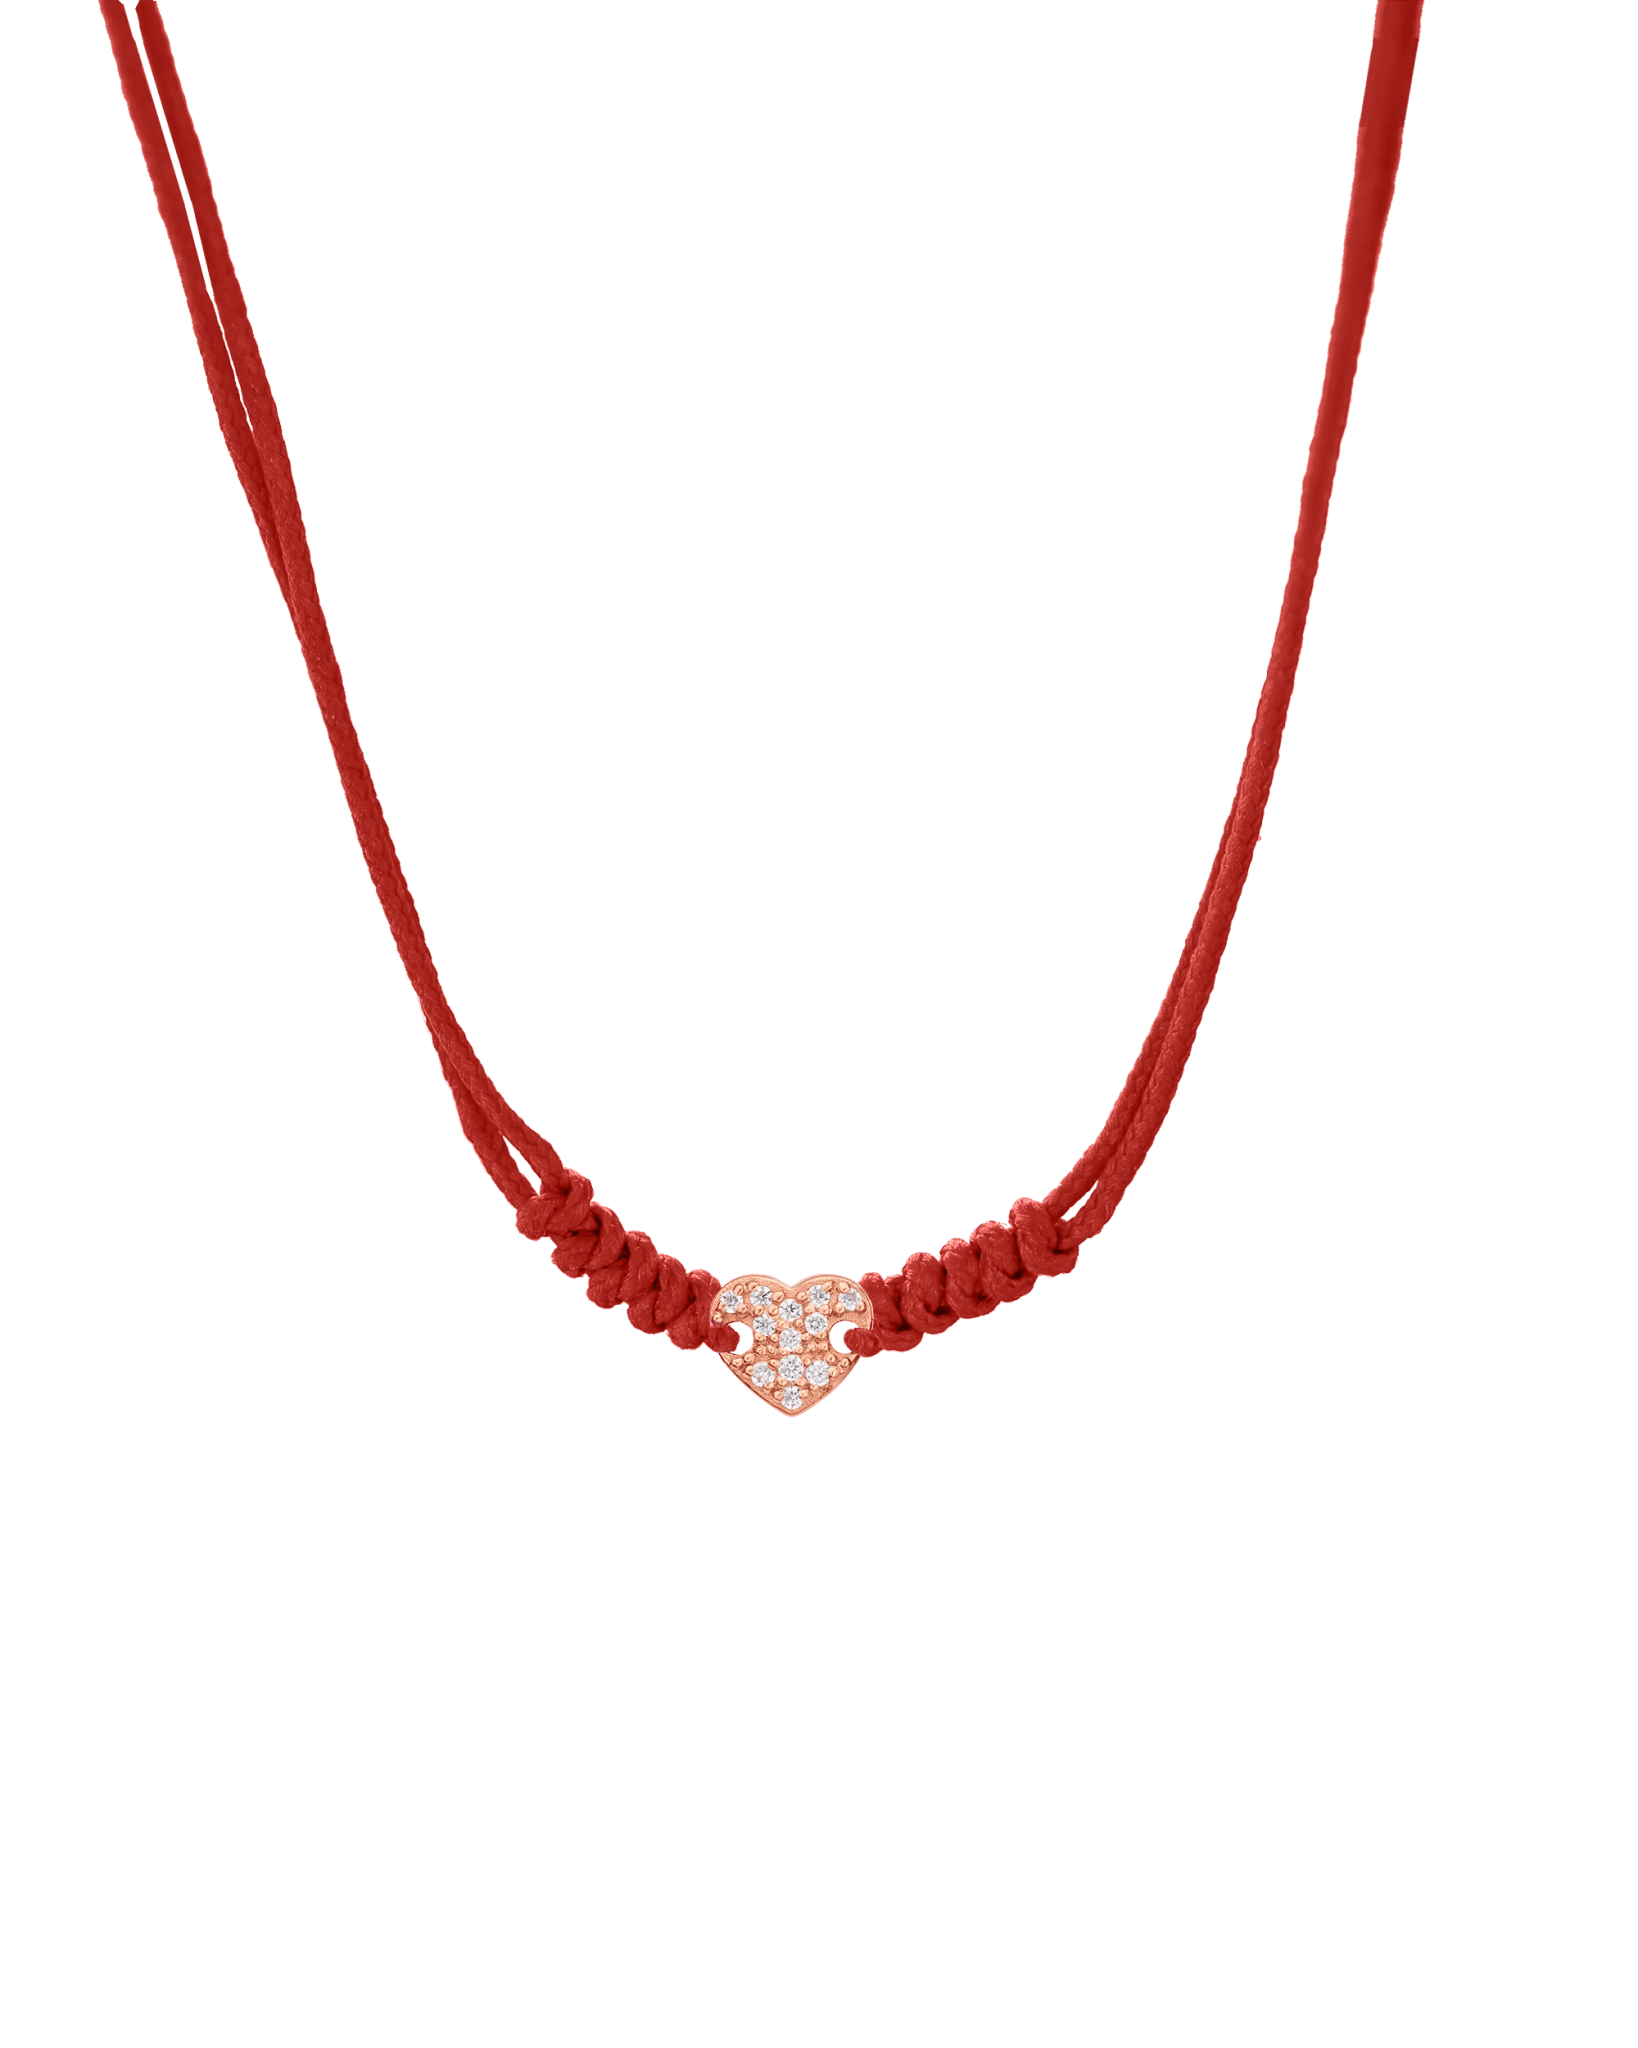 Diamond Paved Heart String of Love Necklace - 14K Rose Gold Necklaces 14K Solid Gold Red 